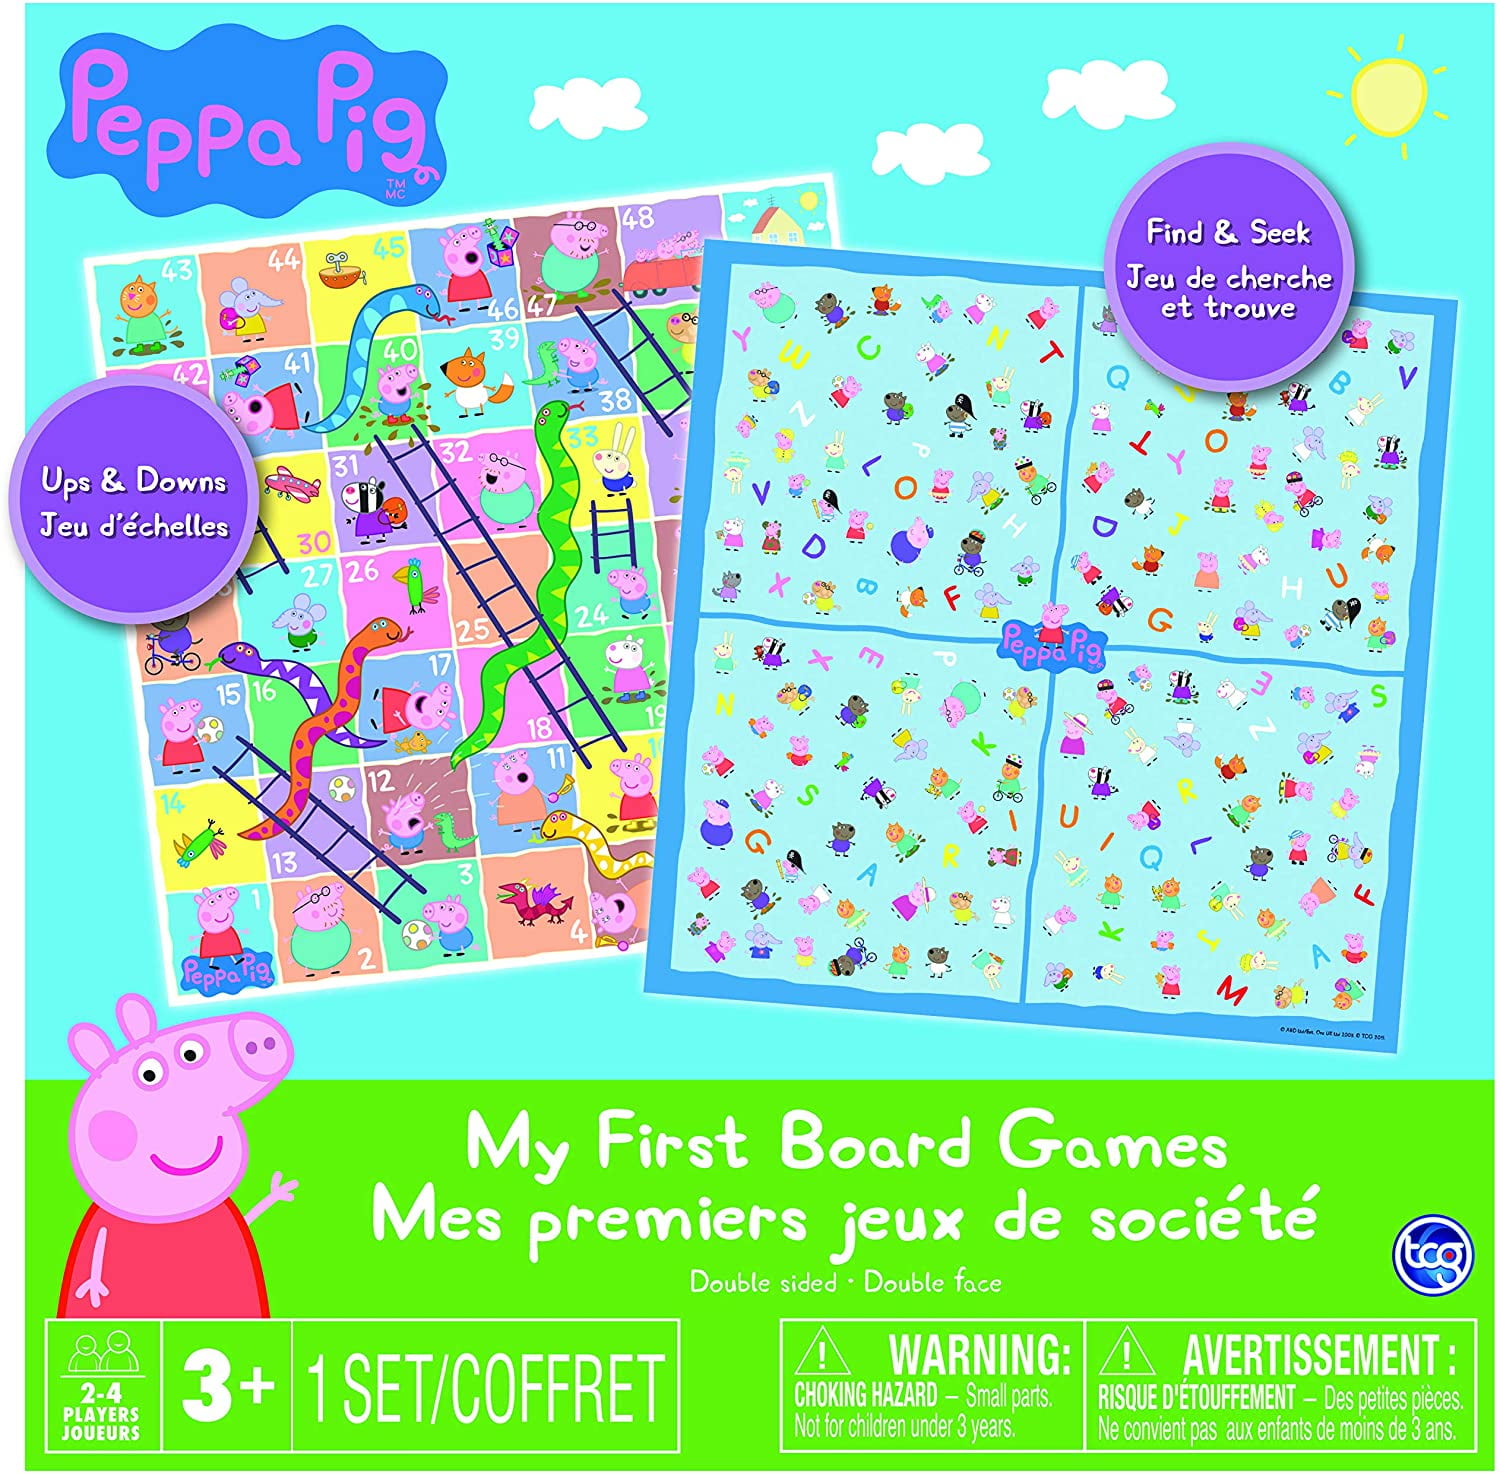 Peppa Pig Guess Who 2 player Board Game For ages 3yrs and above 